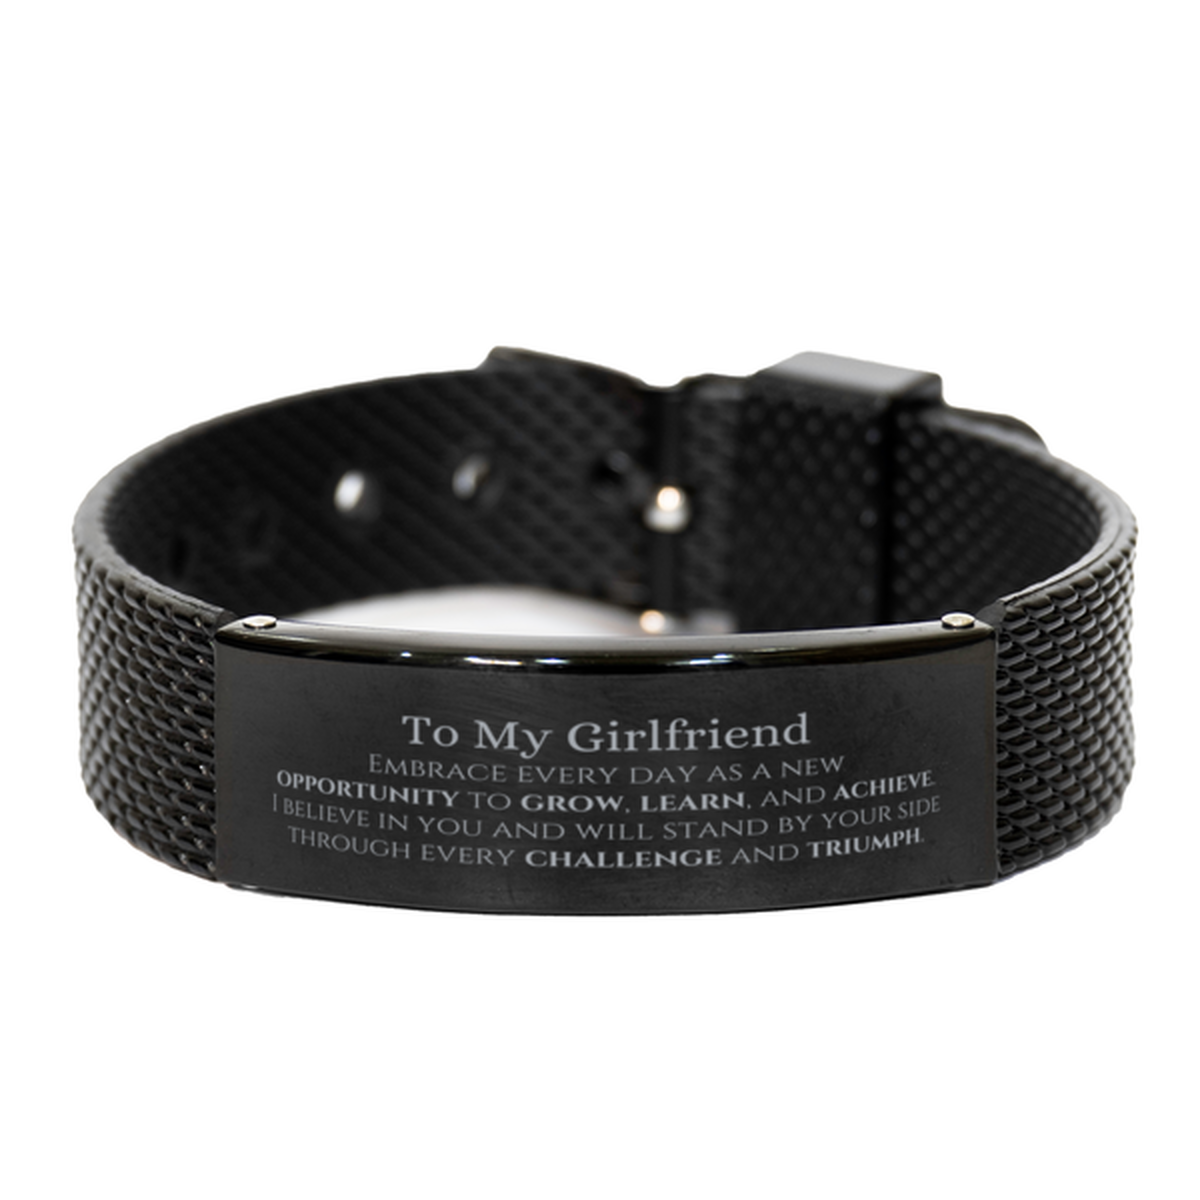 To My Girlfriend Gifts, I believe in you and will stand by your side, Inspirational Black Shark Mesh Bracelet For Girlfriend, Birthday Christmas Motivational Girlfriend Gifts